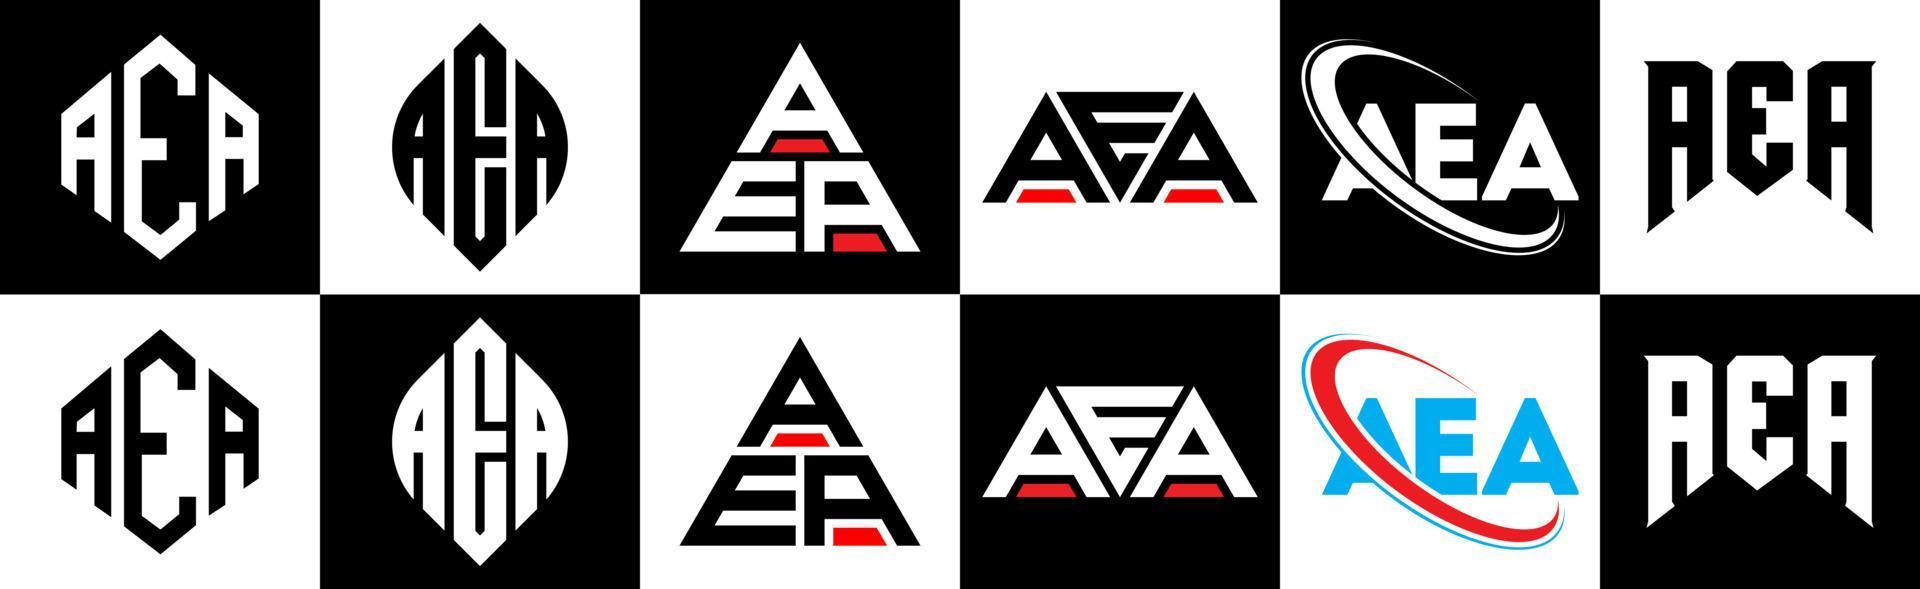 AEA letter logo design in six style. AEA polygon, circle, triangle, hexagon, flat and simple style with black and white color variation letter logo set in one artboard. AEA minimalist and classic logo vector